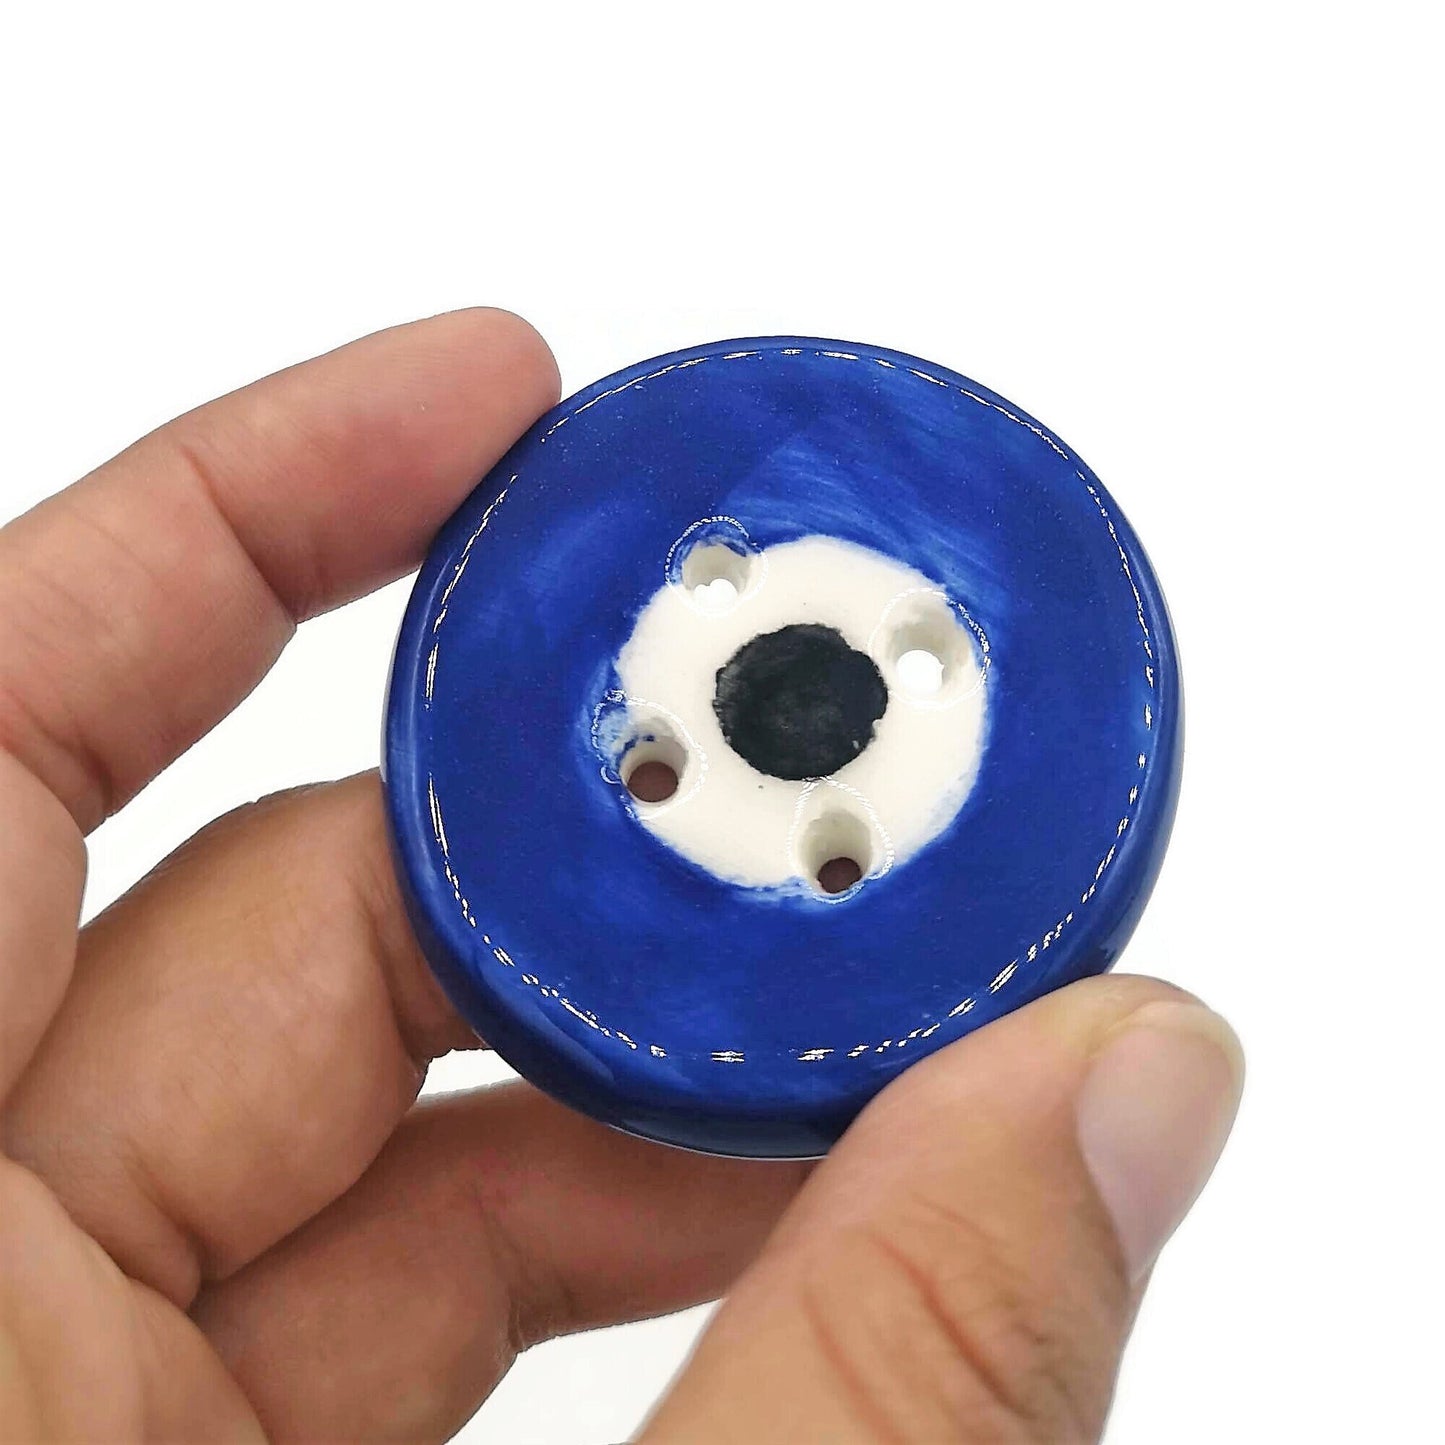 Evil Eye Buttons, 1 Pc Sewing Buttons Round Shape For Coat, Blouse & Crafts - Ceramica Ana Rafael